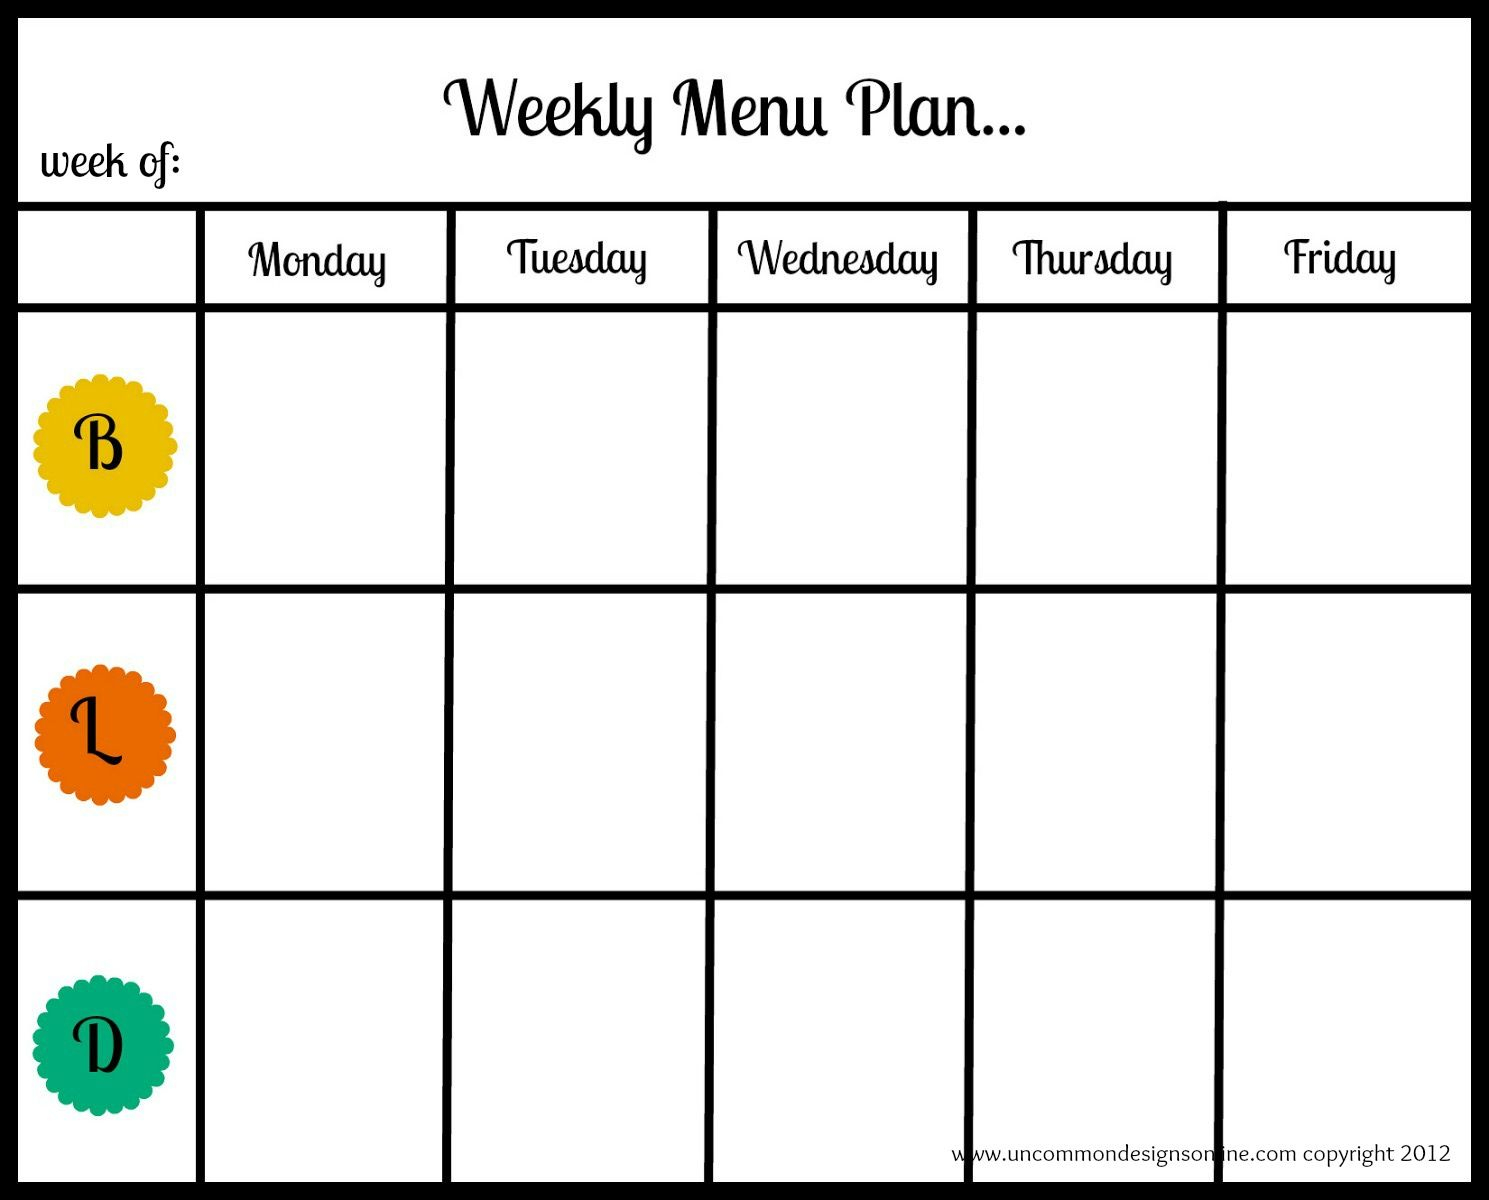 Meal Planning Printables And Tips